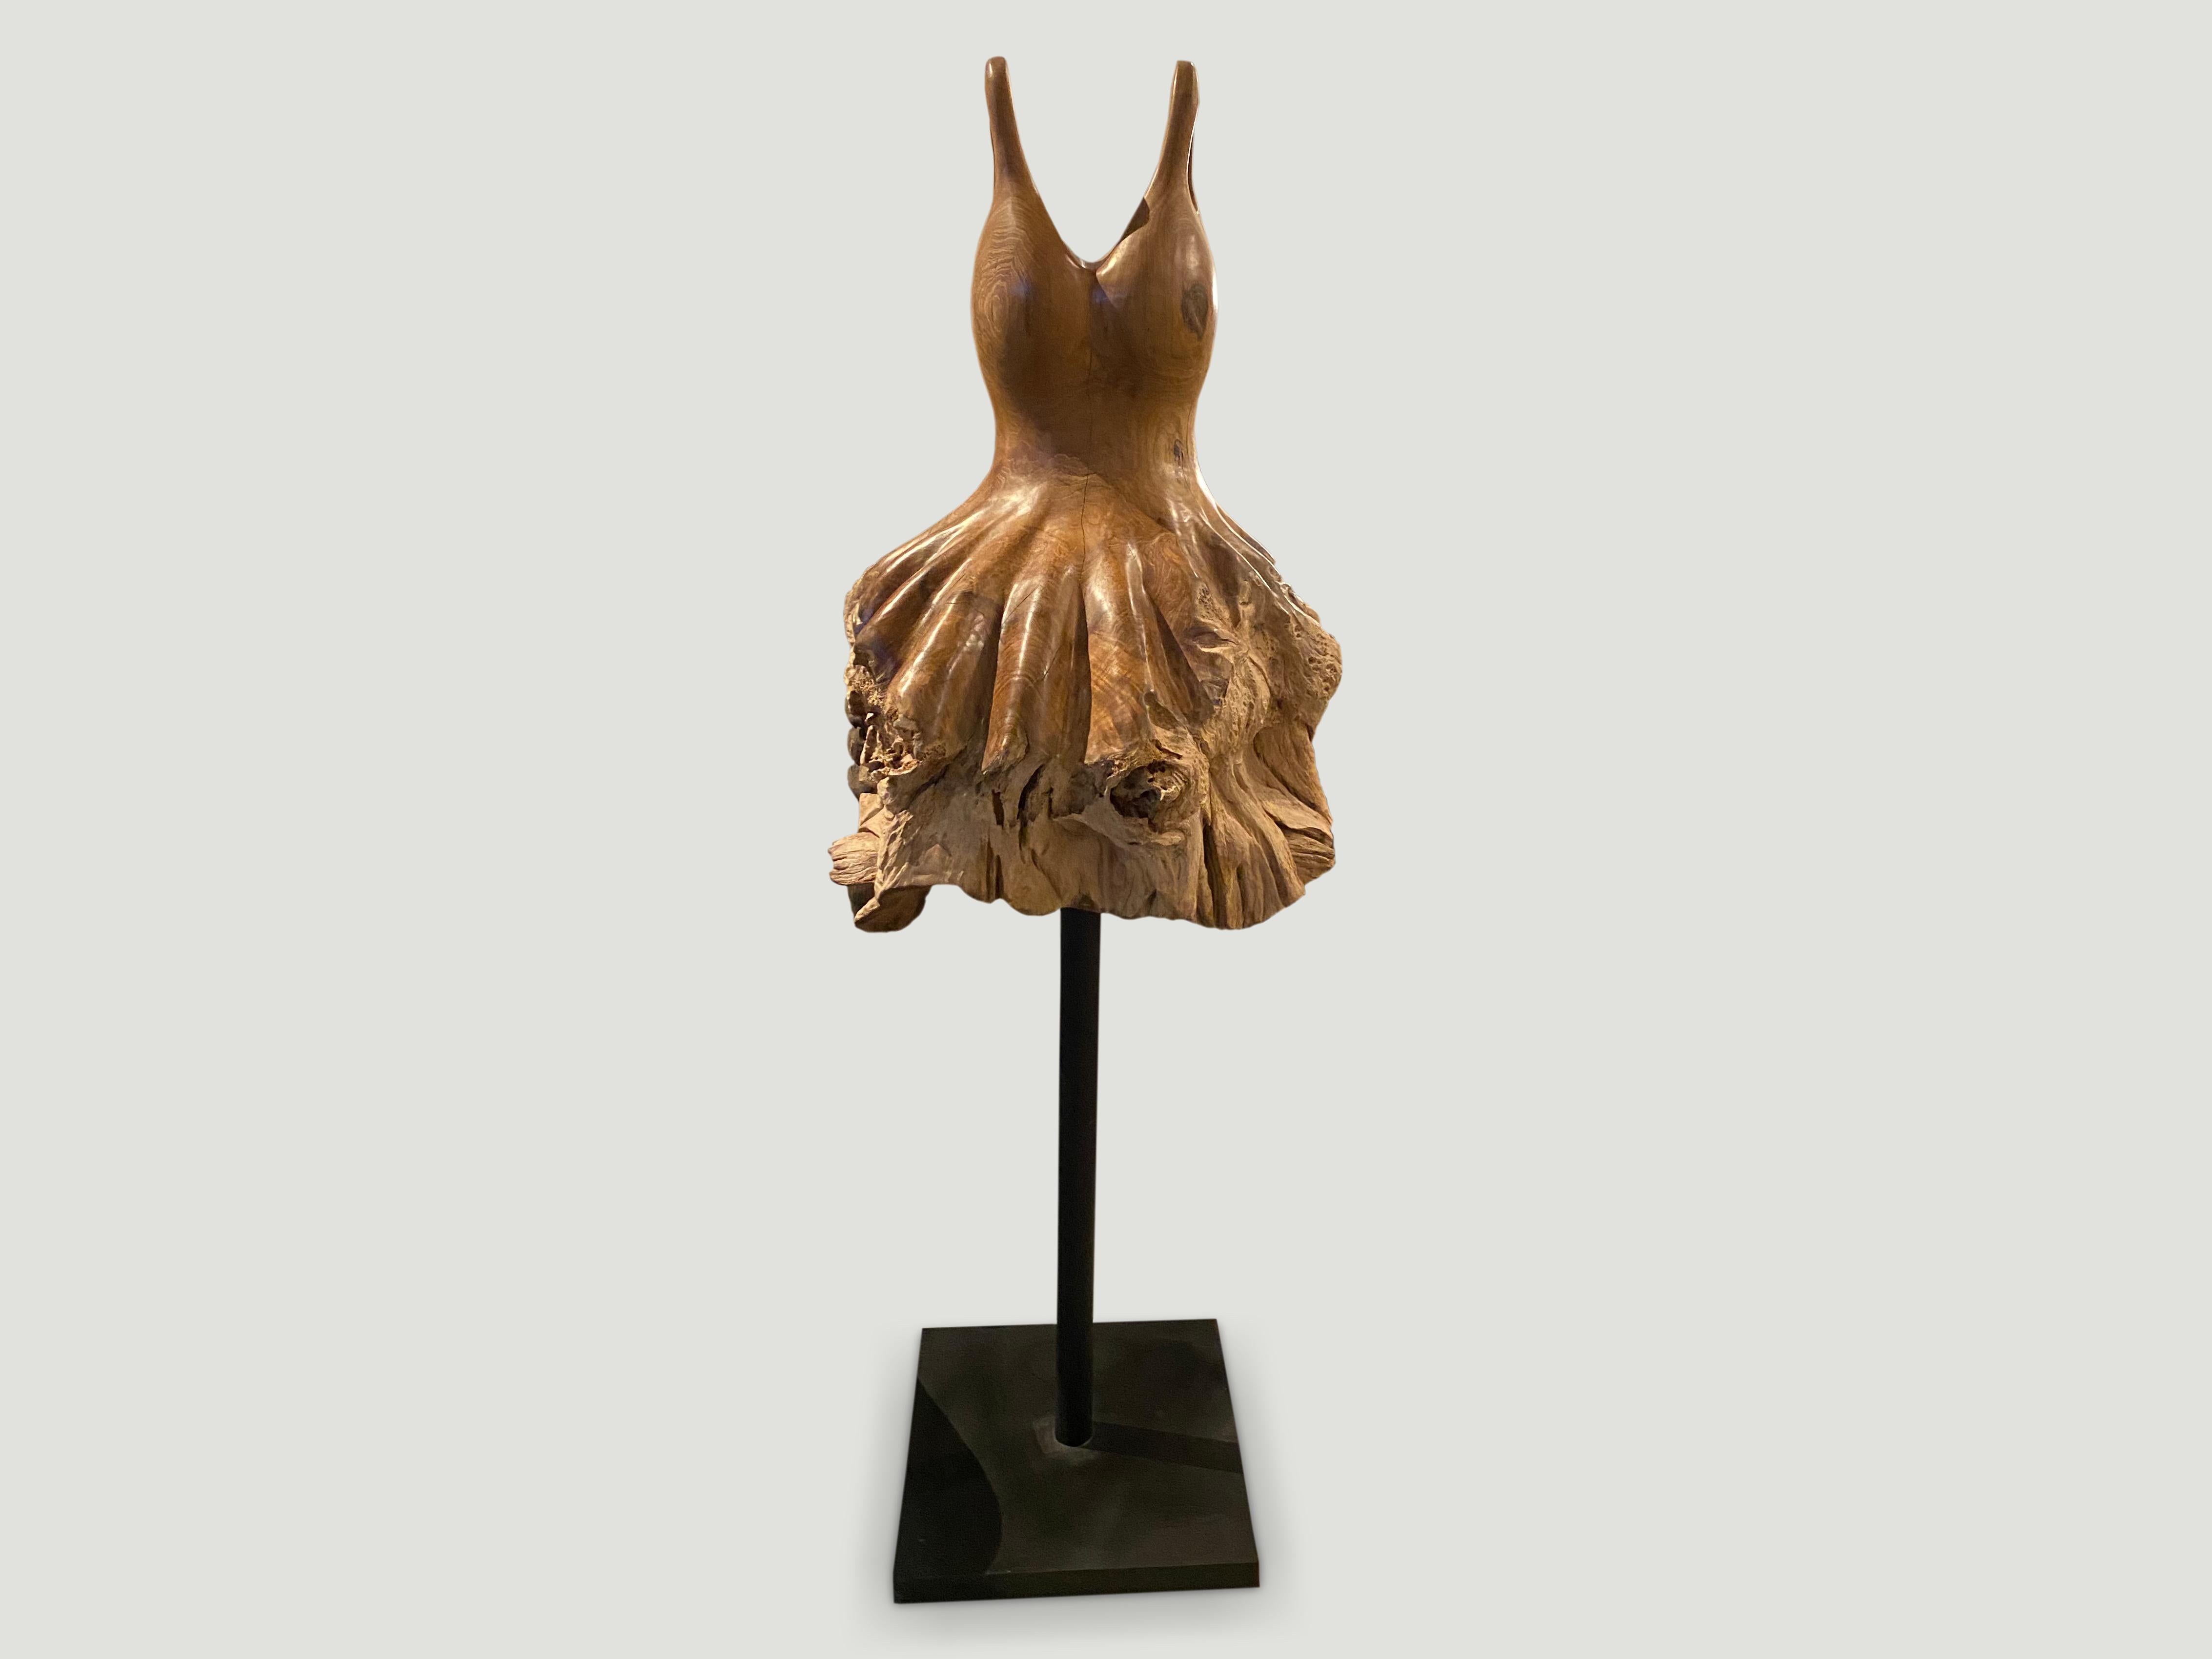 Hand carved from a single teak root, a beautiful ballerina dress. We left the bottom section raw in contrast with the top section which has been sanded and polished with a natural oil finish revealing the natural beauty of the wood. Set on a modern